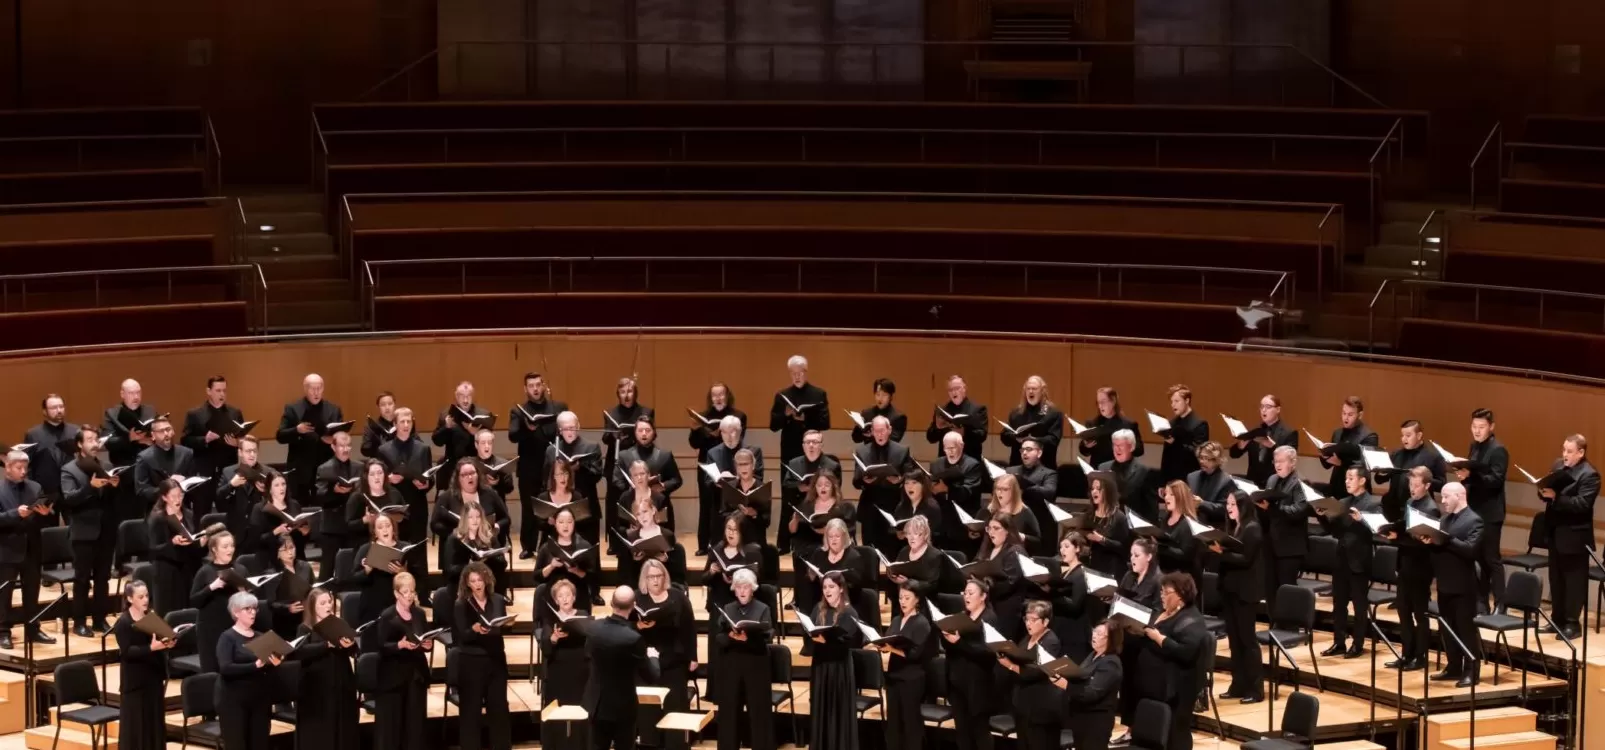 Pacific Chorale returns to the stage with Rachmaninoff Vespers